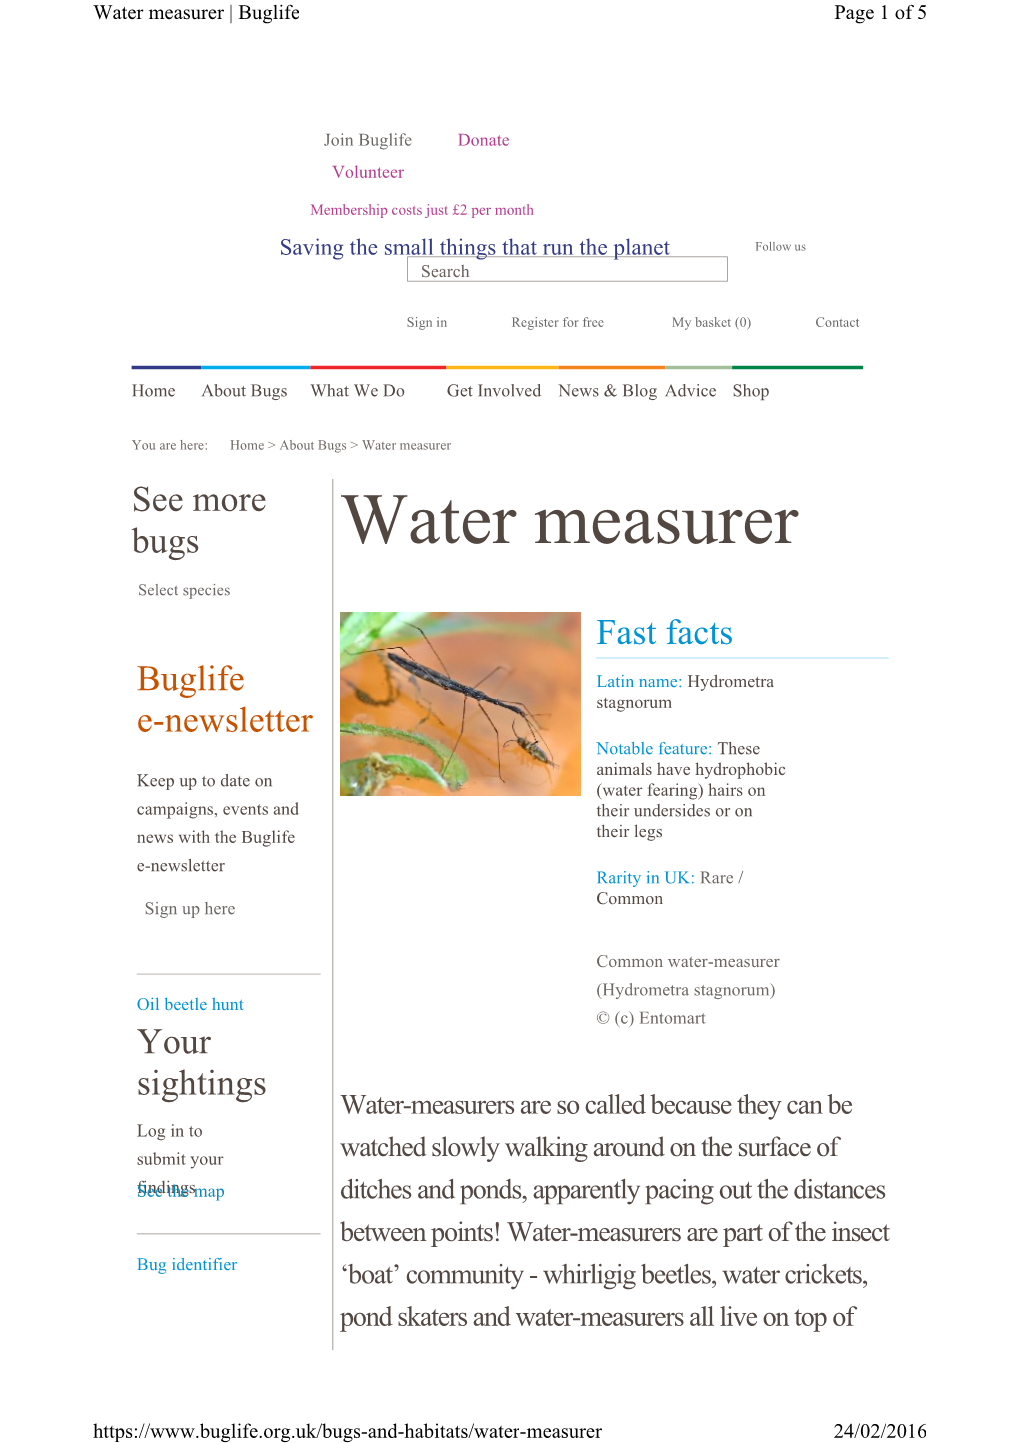 Water Measurer | Buglife Page 1 of 5